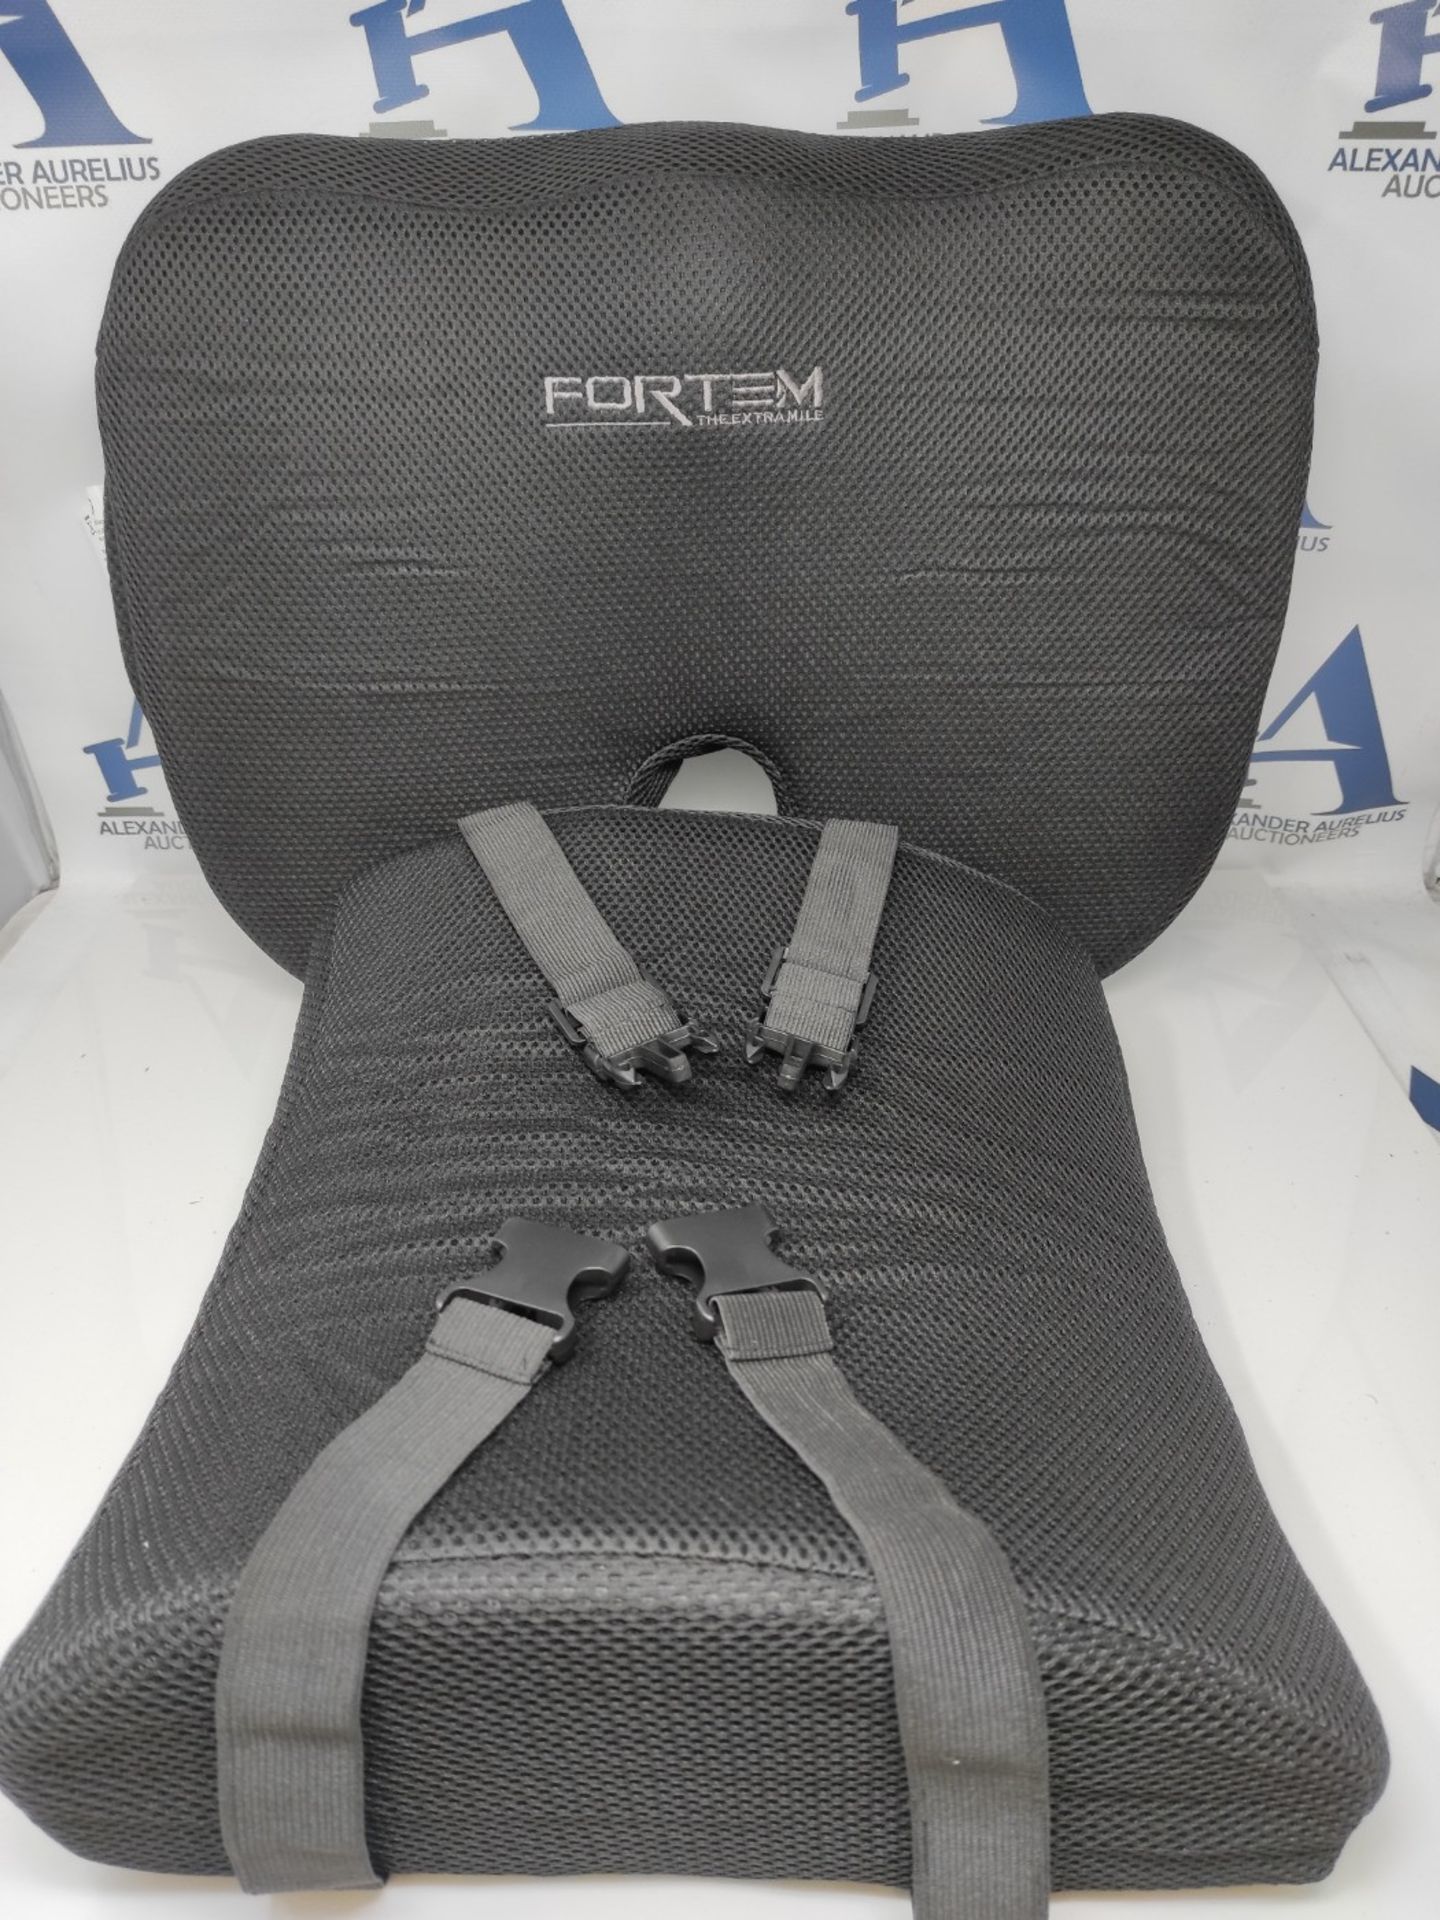 FORTEM Chair Seat Cushion for Office Chair, Lumbar Support Pillow, Car Seat Cushion, B - Image 2 of 2